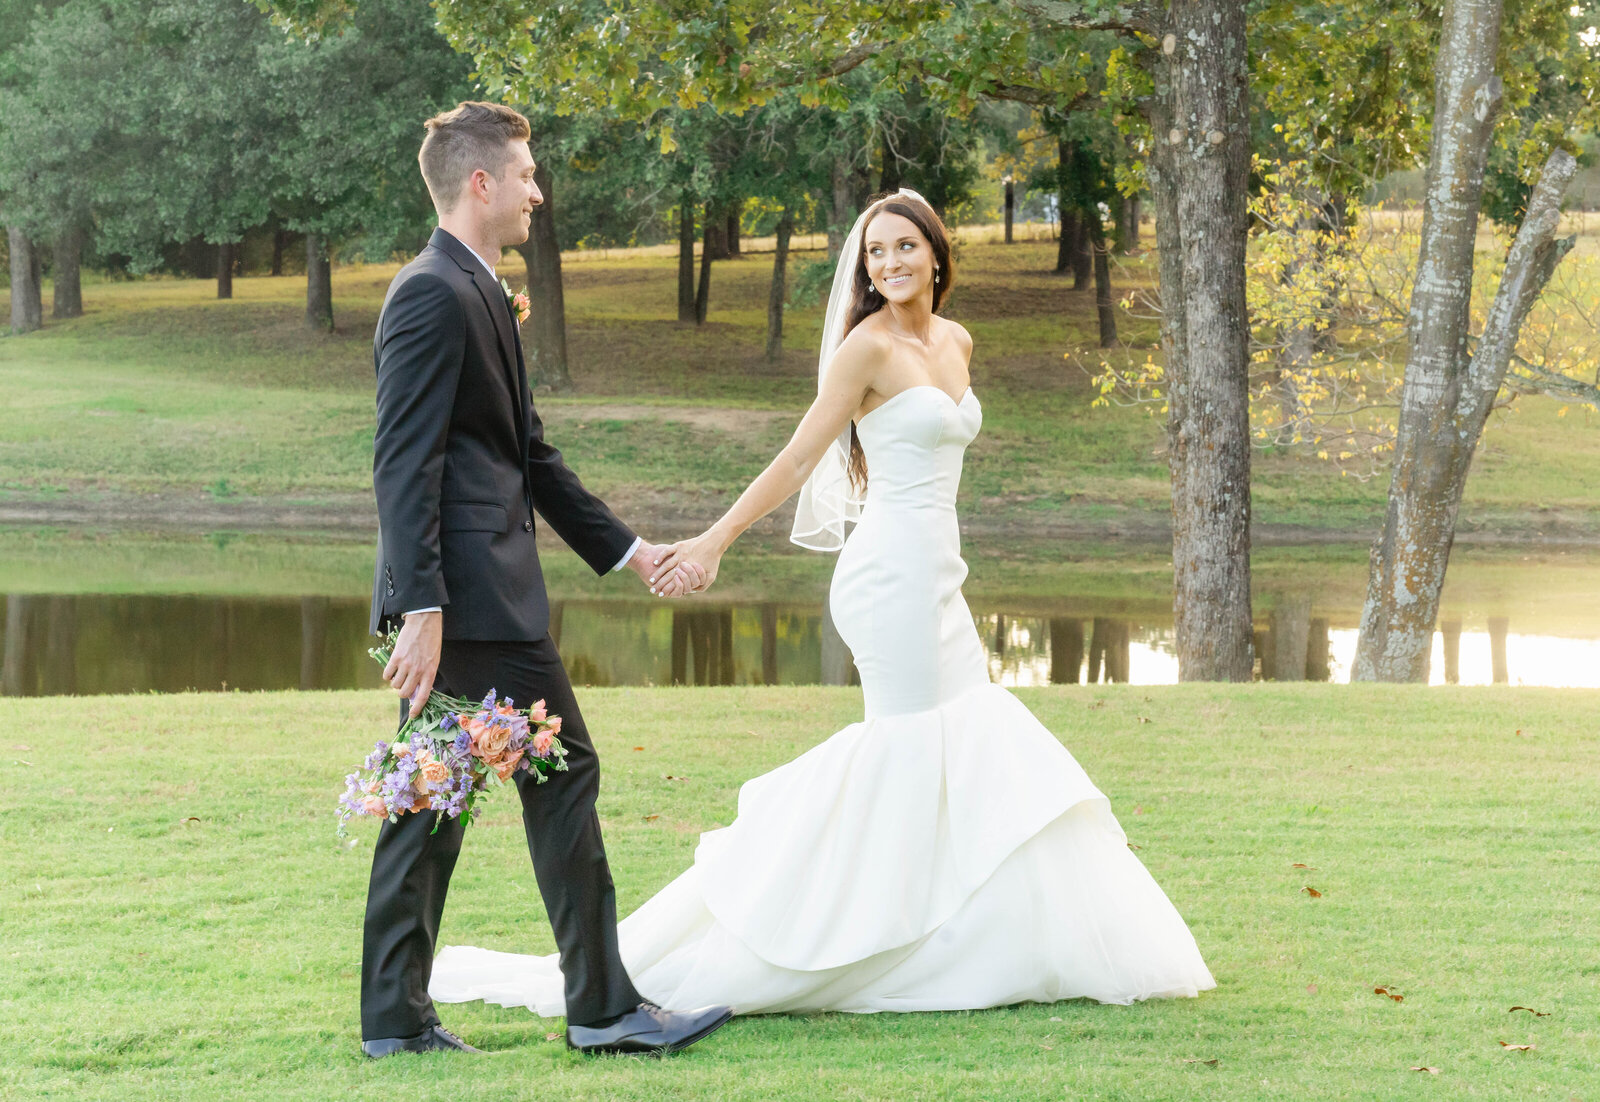 Portrait of a bride and groom in a white wedding gown and black tuxedo with a bouquet of flowers walking on grass.